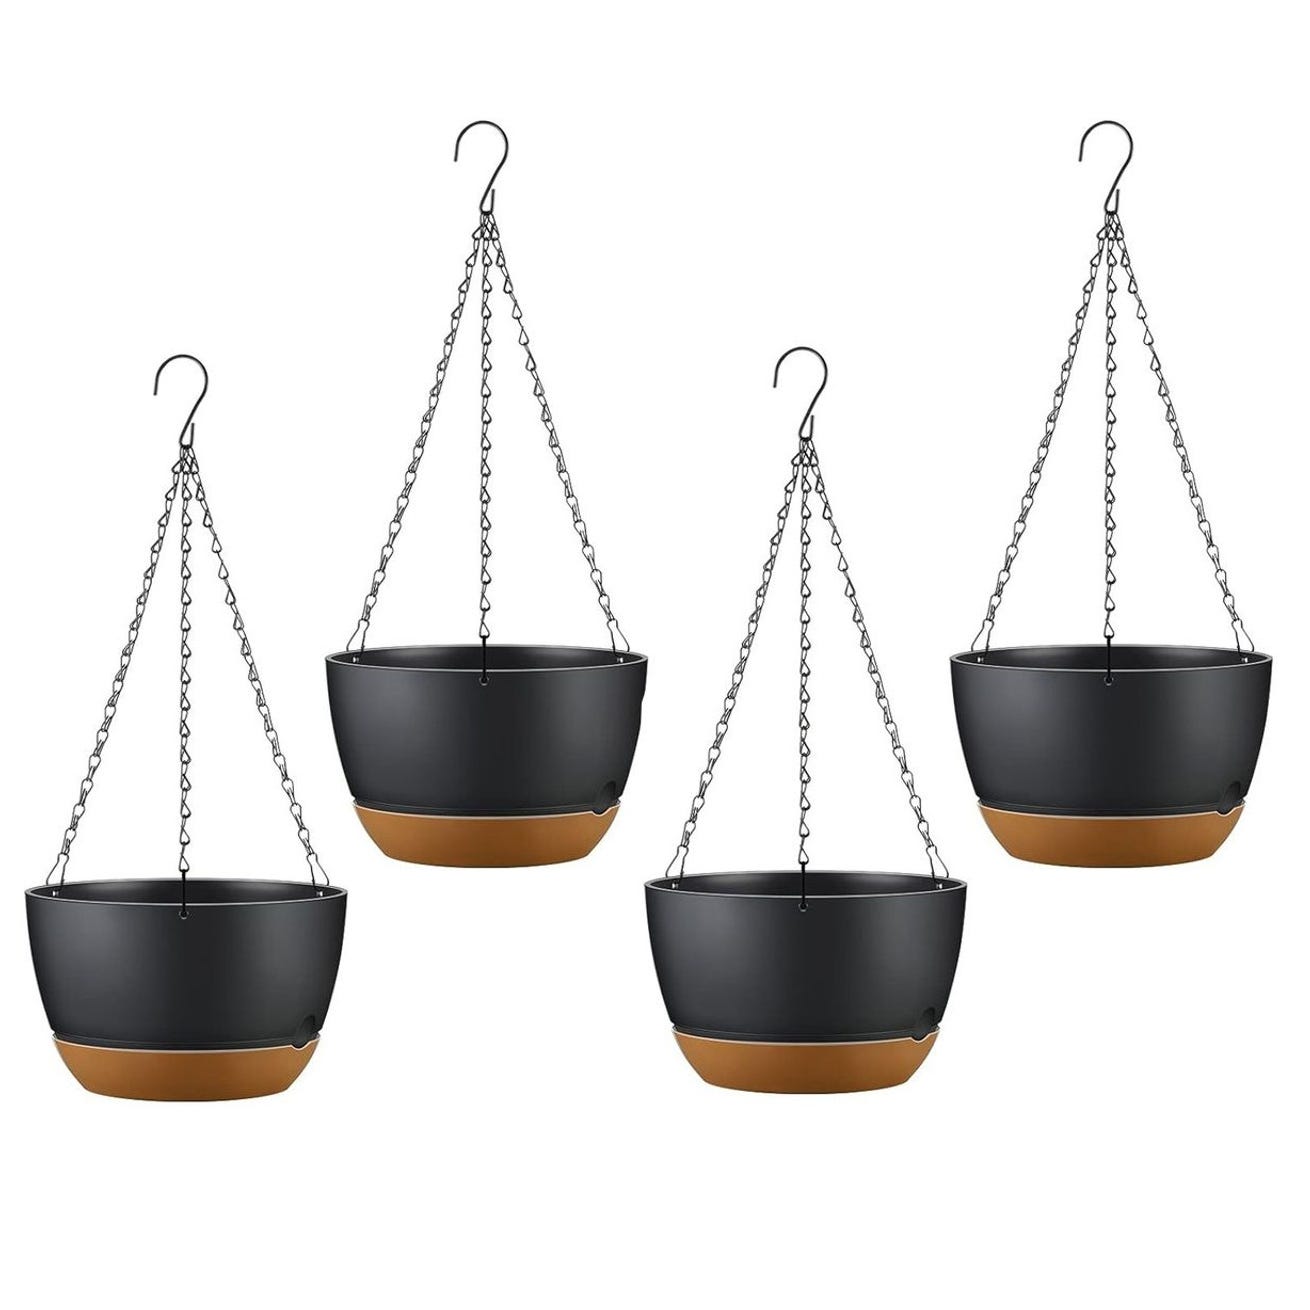 Four black and tan hanging planters with chains.